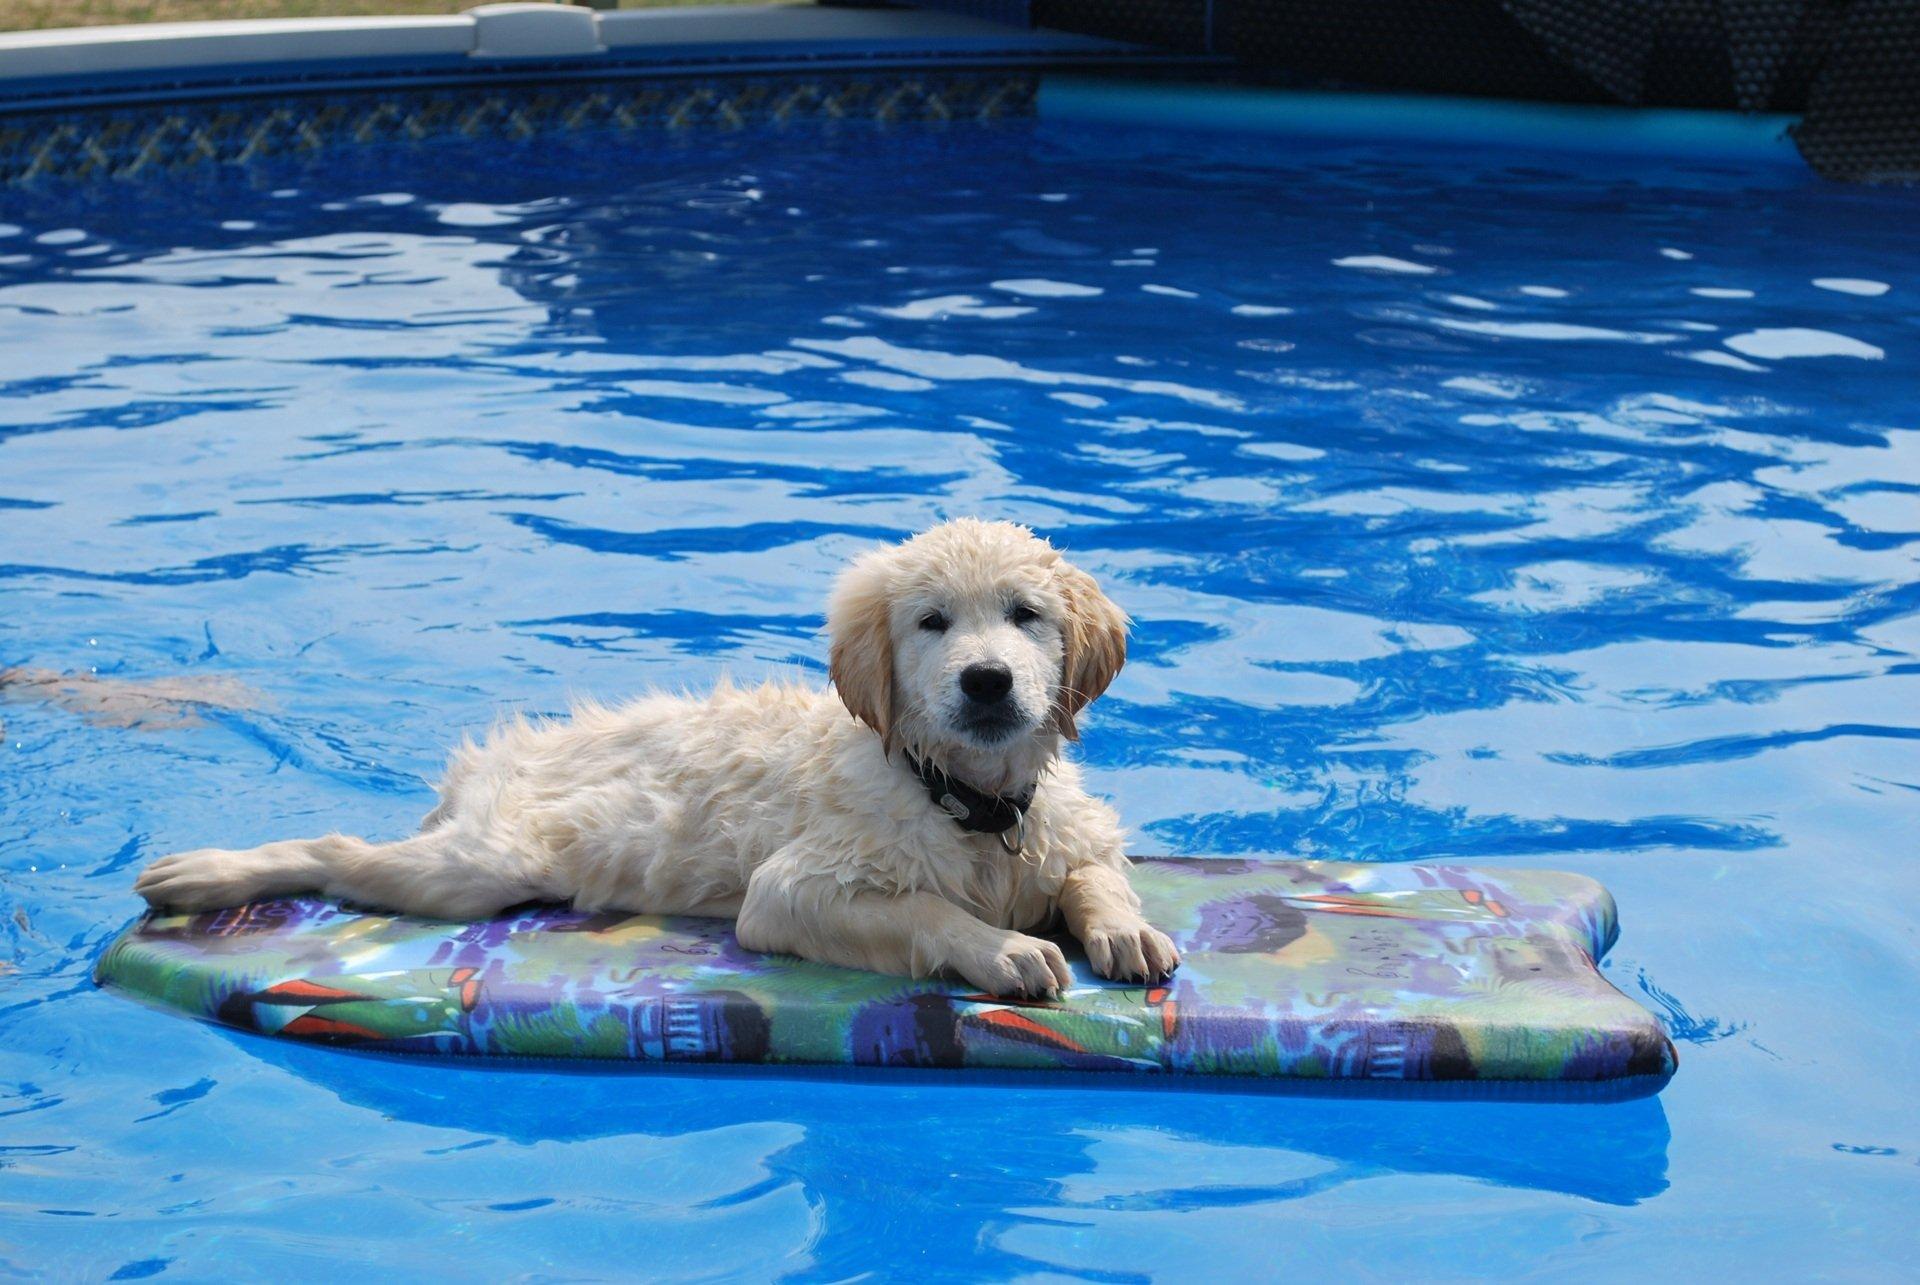 Puppy cooling off in the swimming pool HD Wallpaper